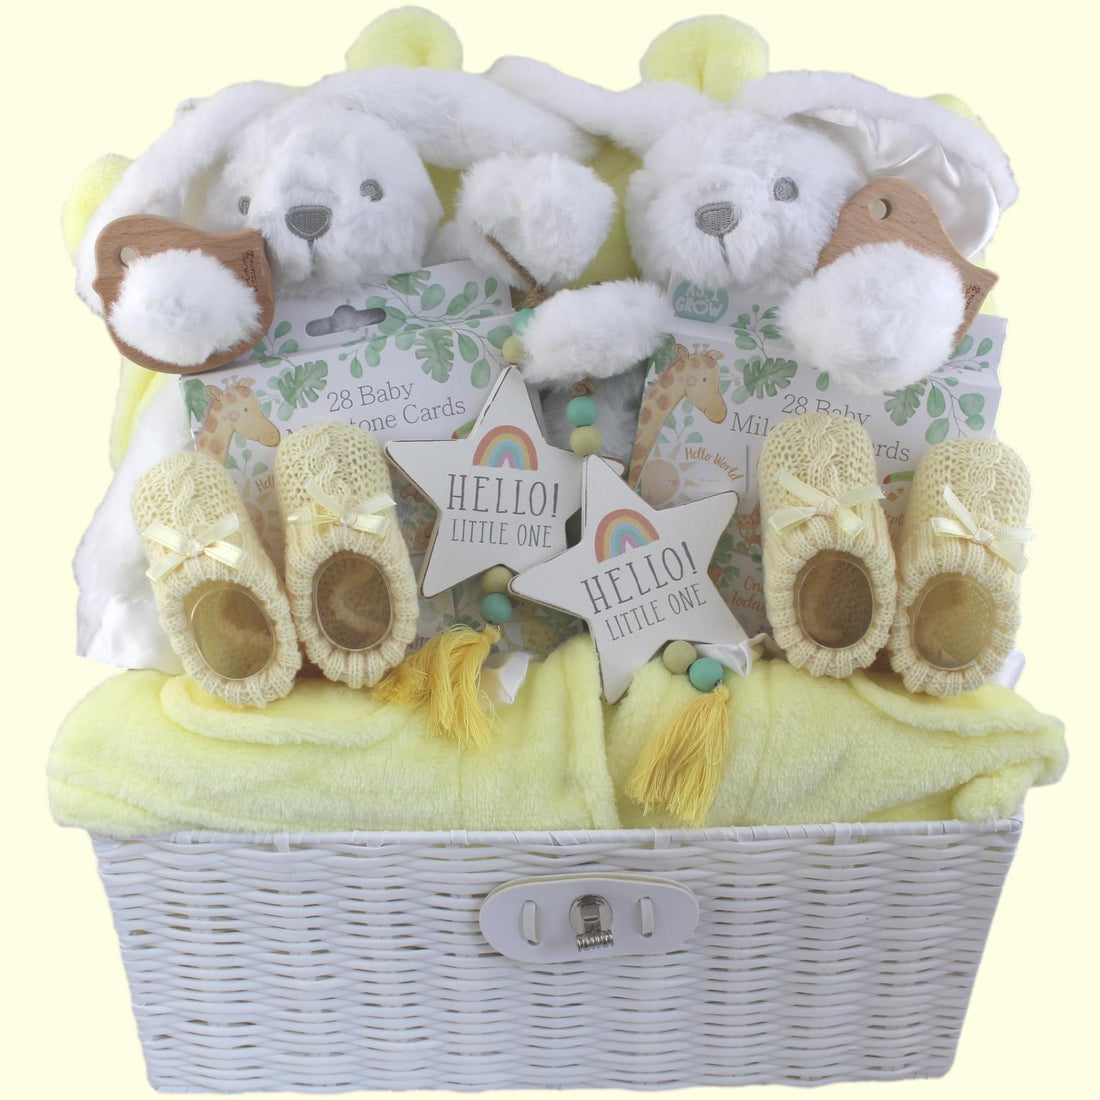 Double the Giggles Luxury Baby Gift Hamper for Twin Girls